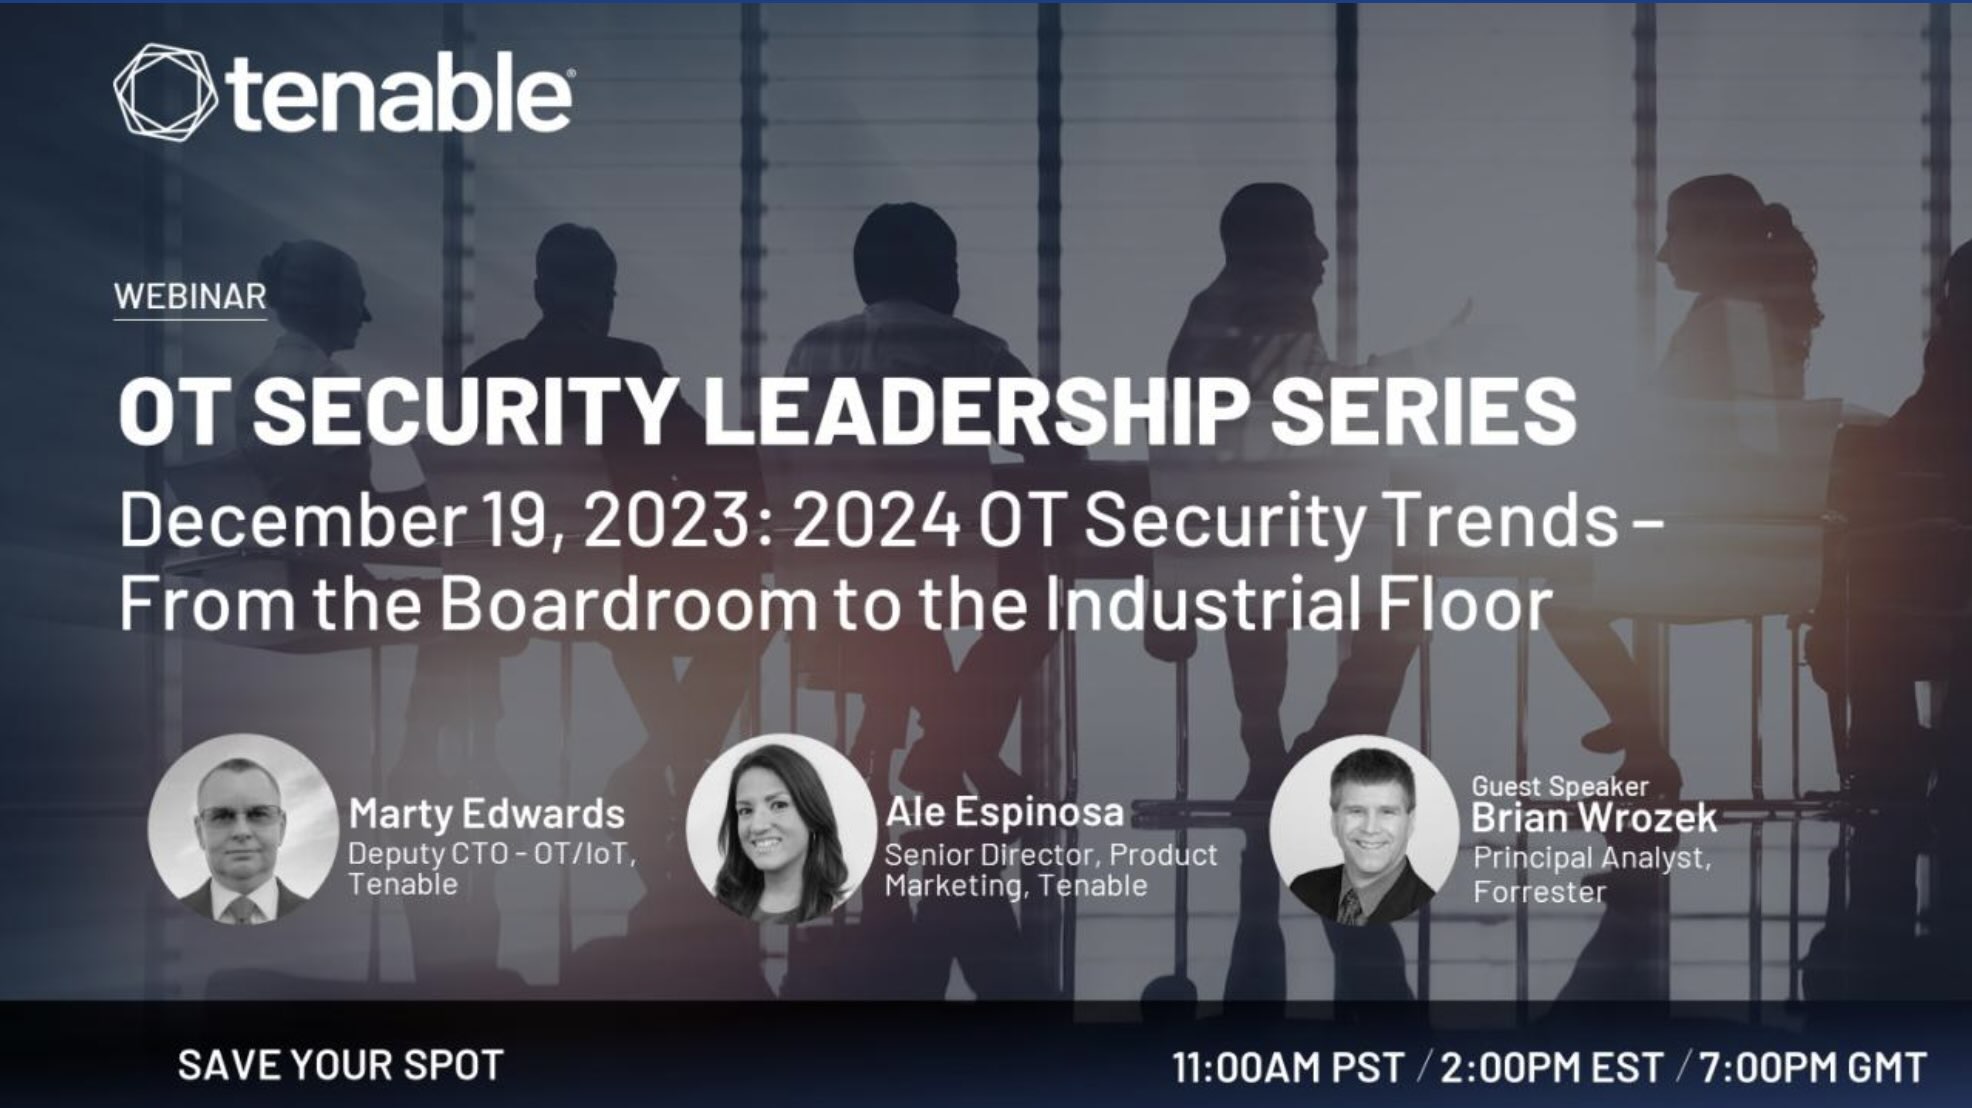 OT Security Leadership Series brought to you by Tenable